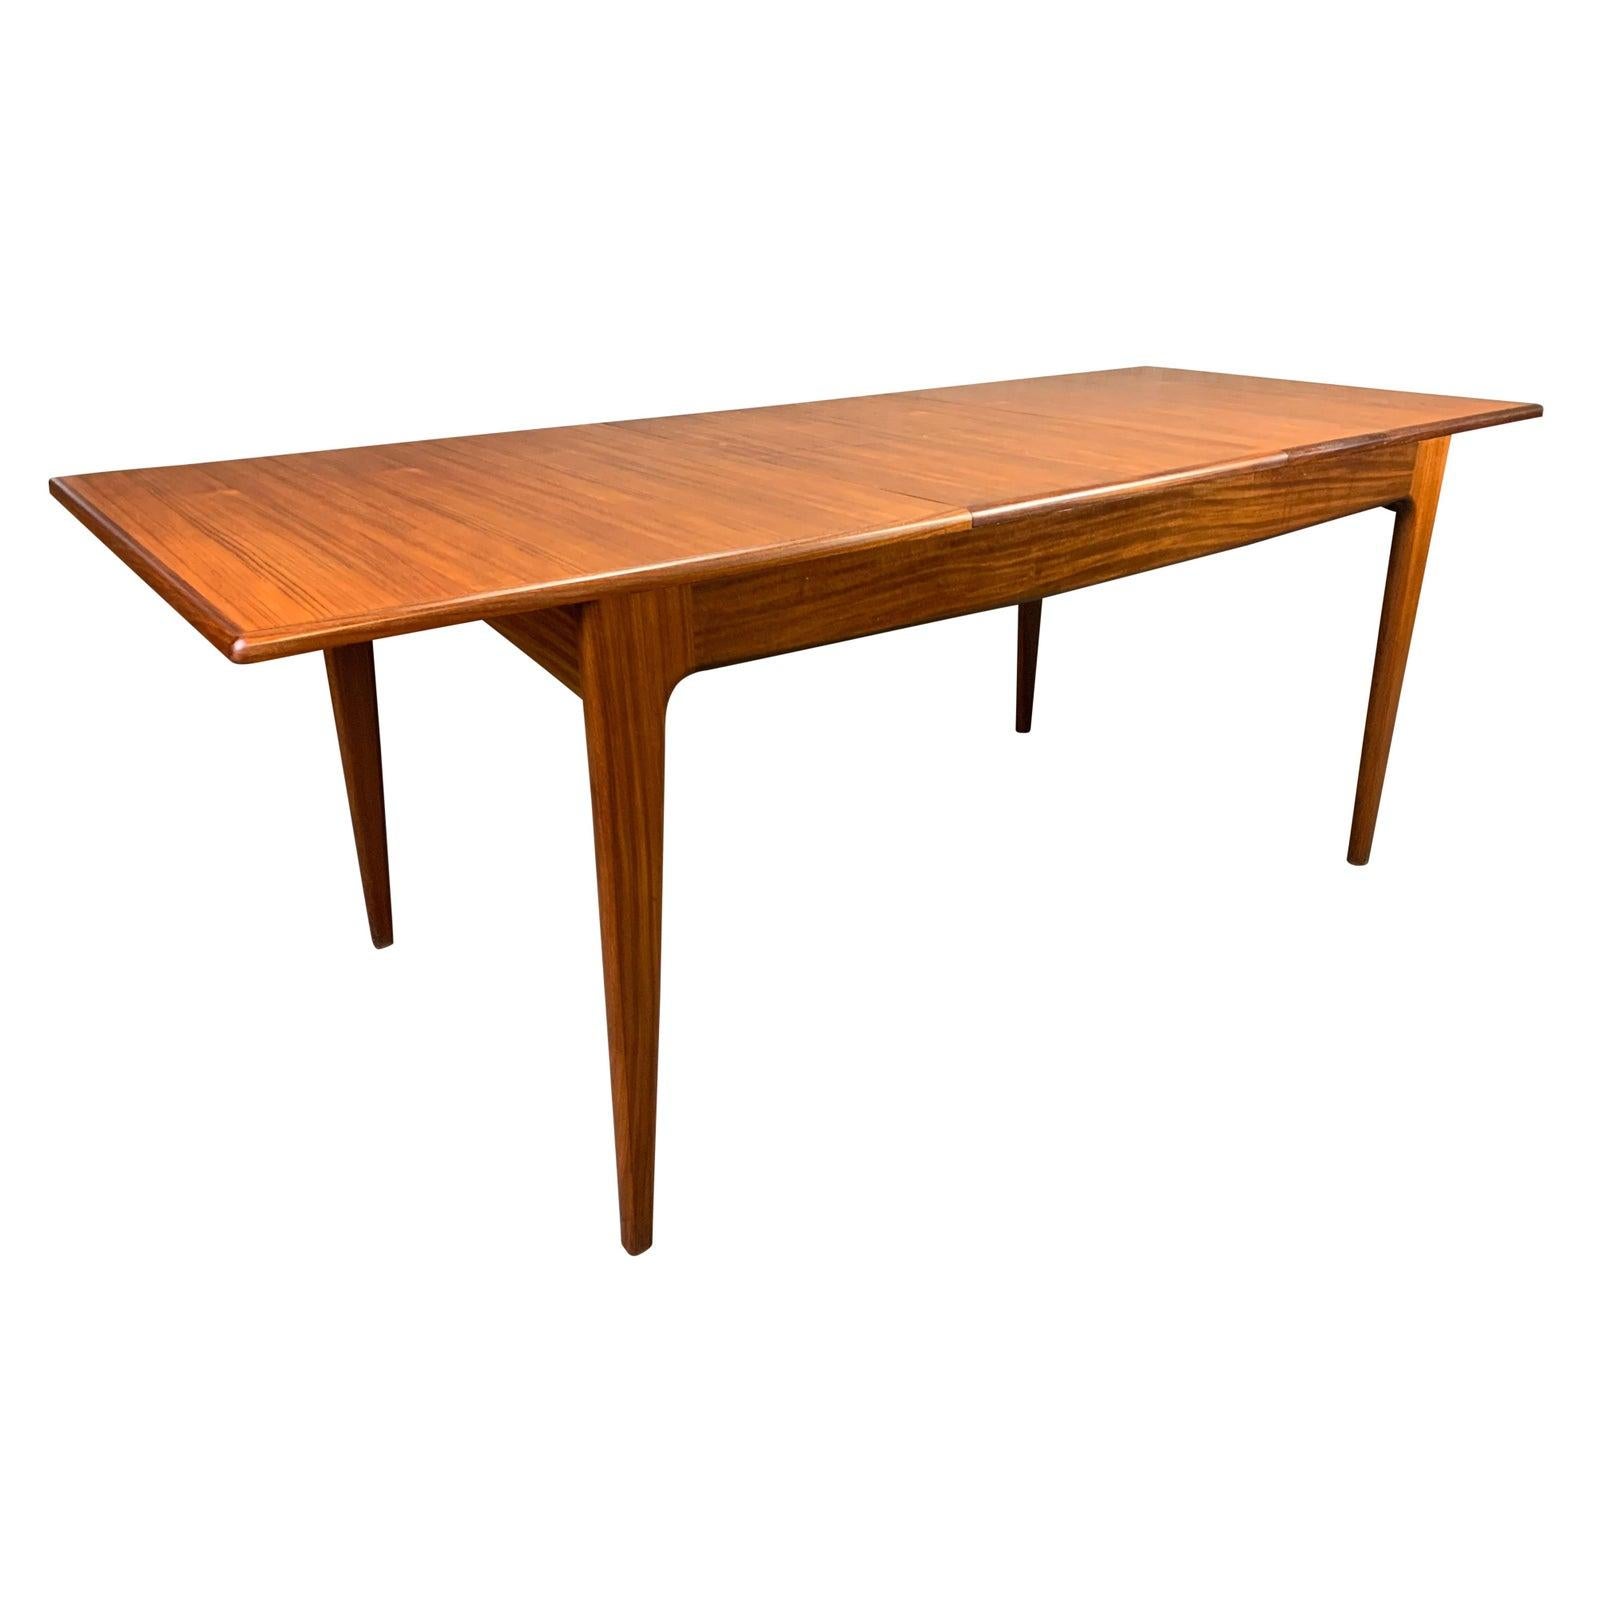 Vintage British Midcentury Teak Dining Table by John Herbert for A. Younger 2